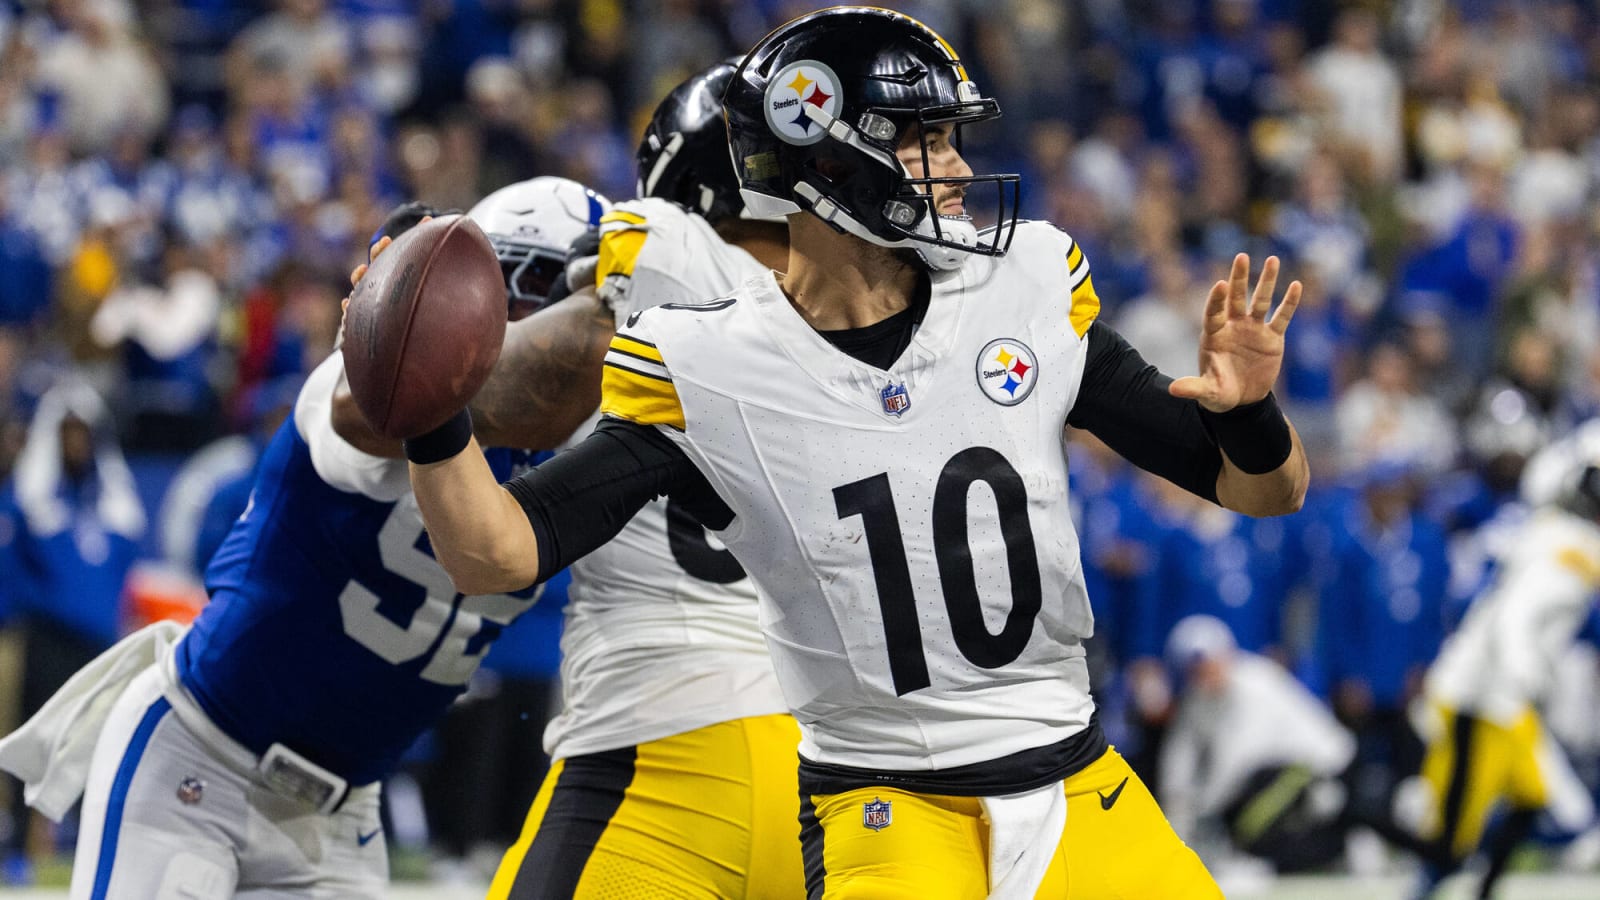 Steelers Allow 30 Unanswered Points in Playoff-Crushing Loss to Colts